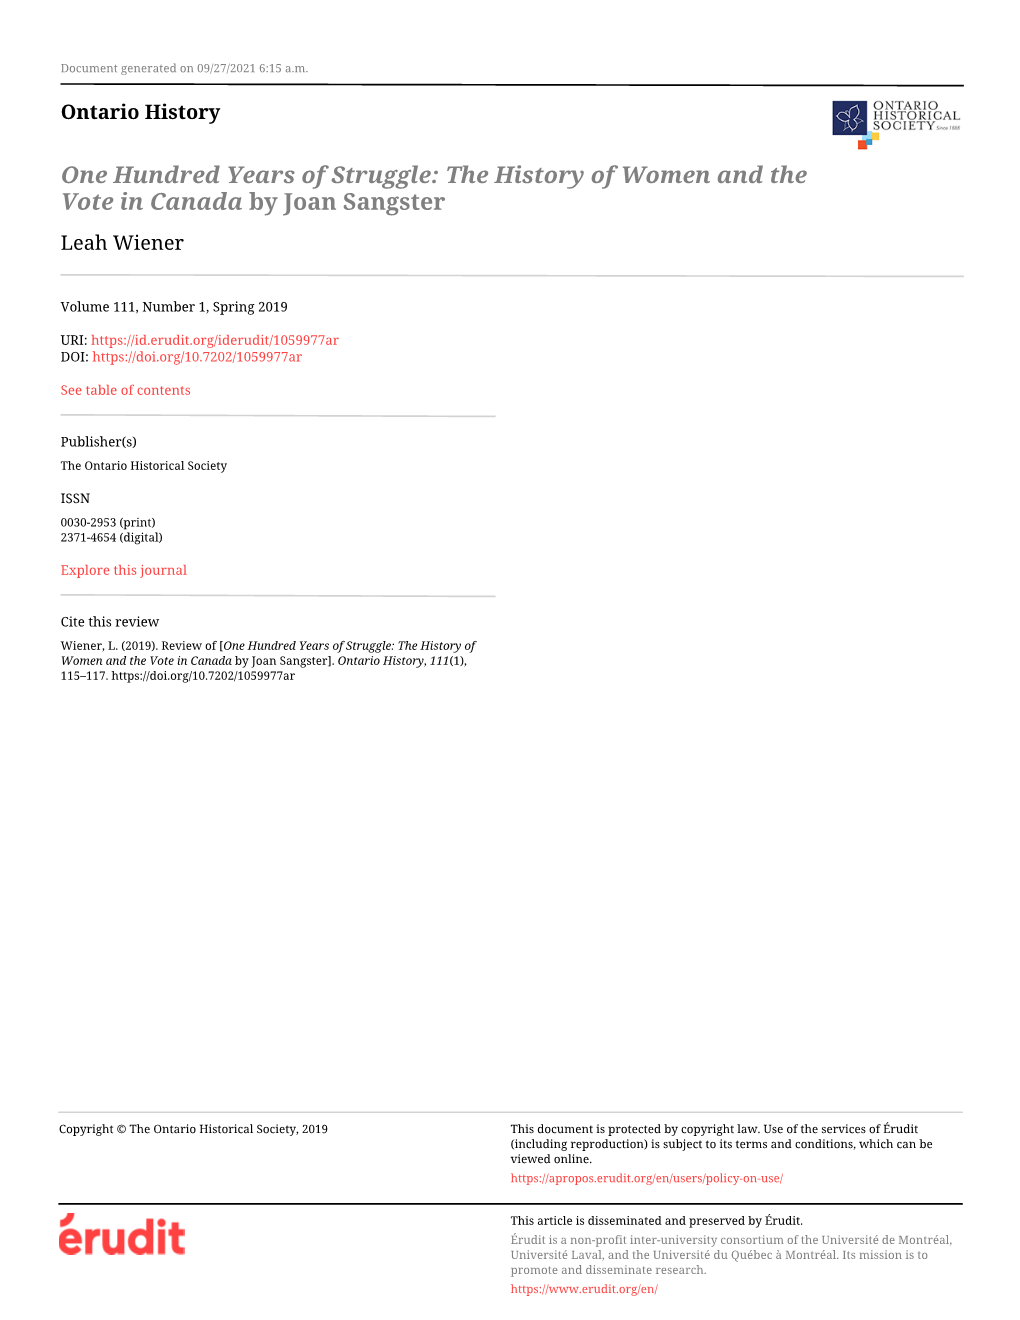 The History of Women and the Vote in Canada by Joan Sangster Leah Wiener